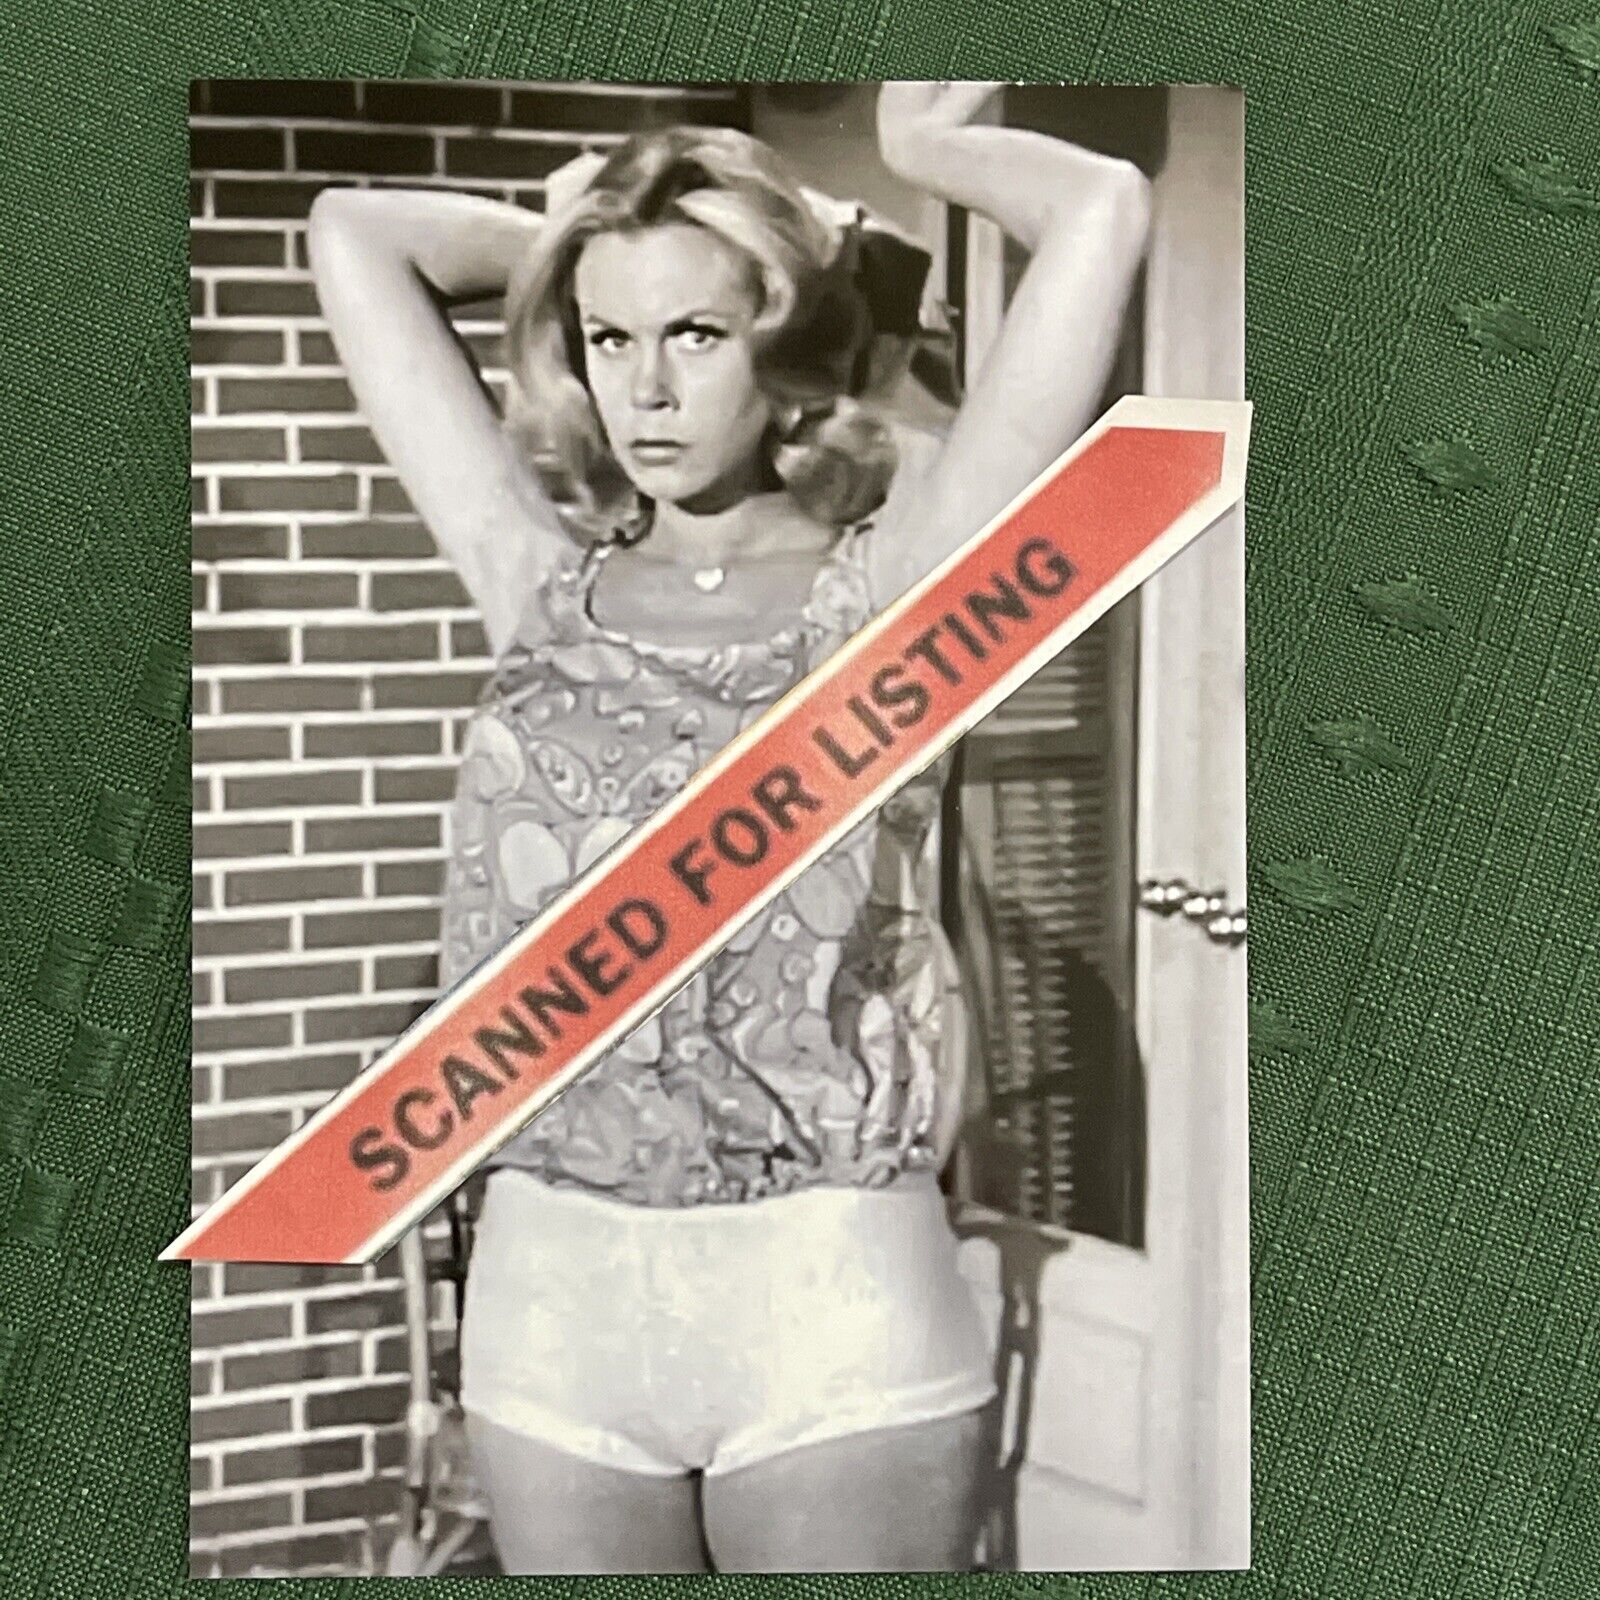 bryan sunday recommends elizabeth montgomery topless pic